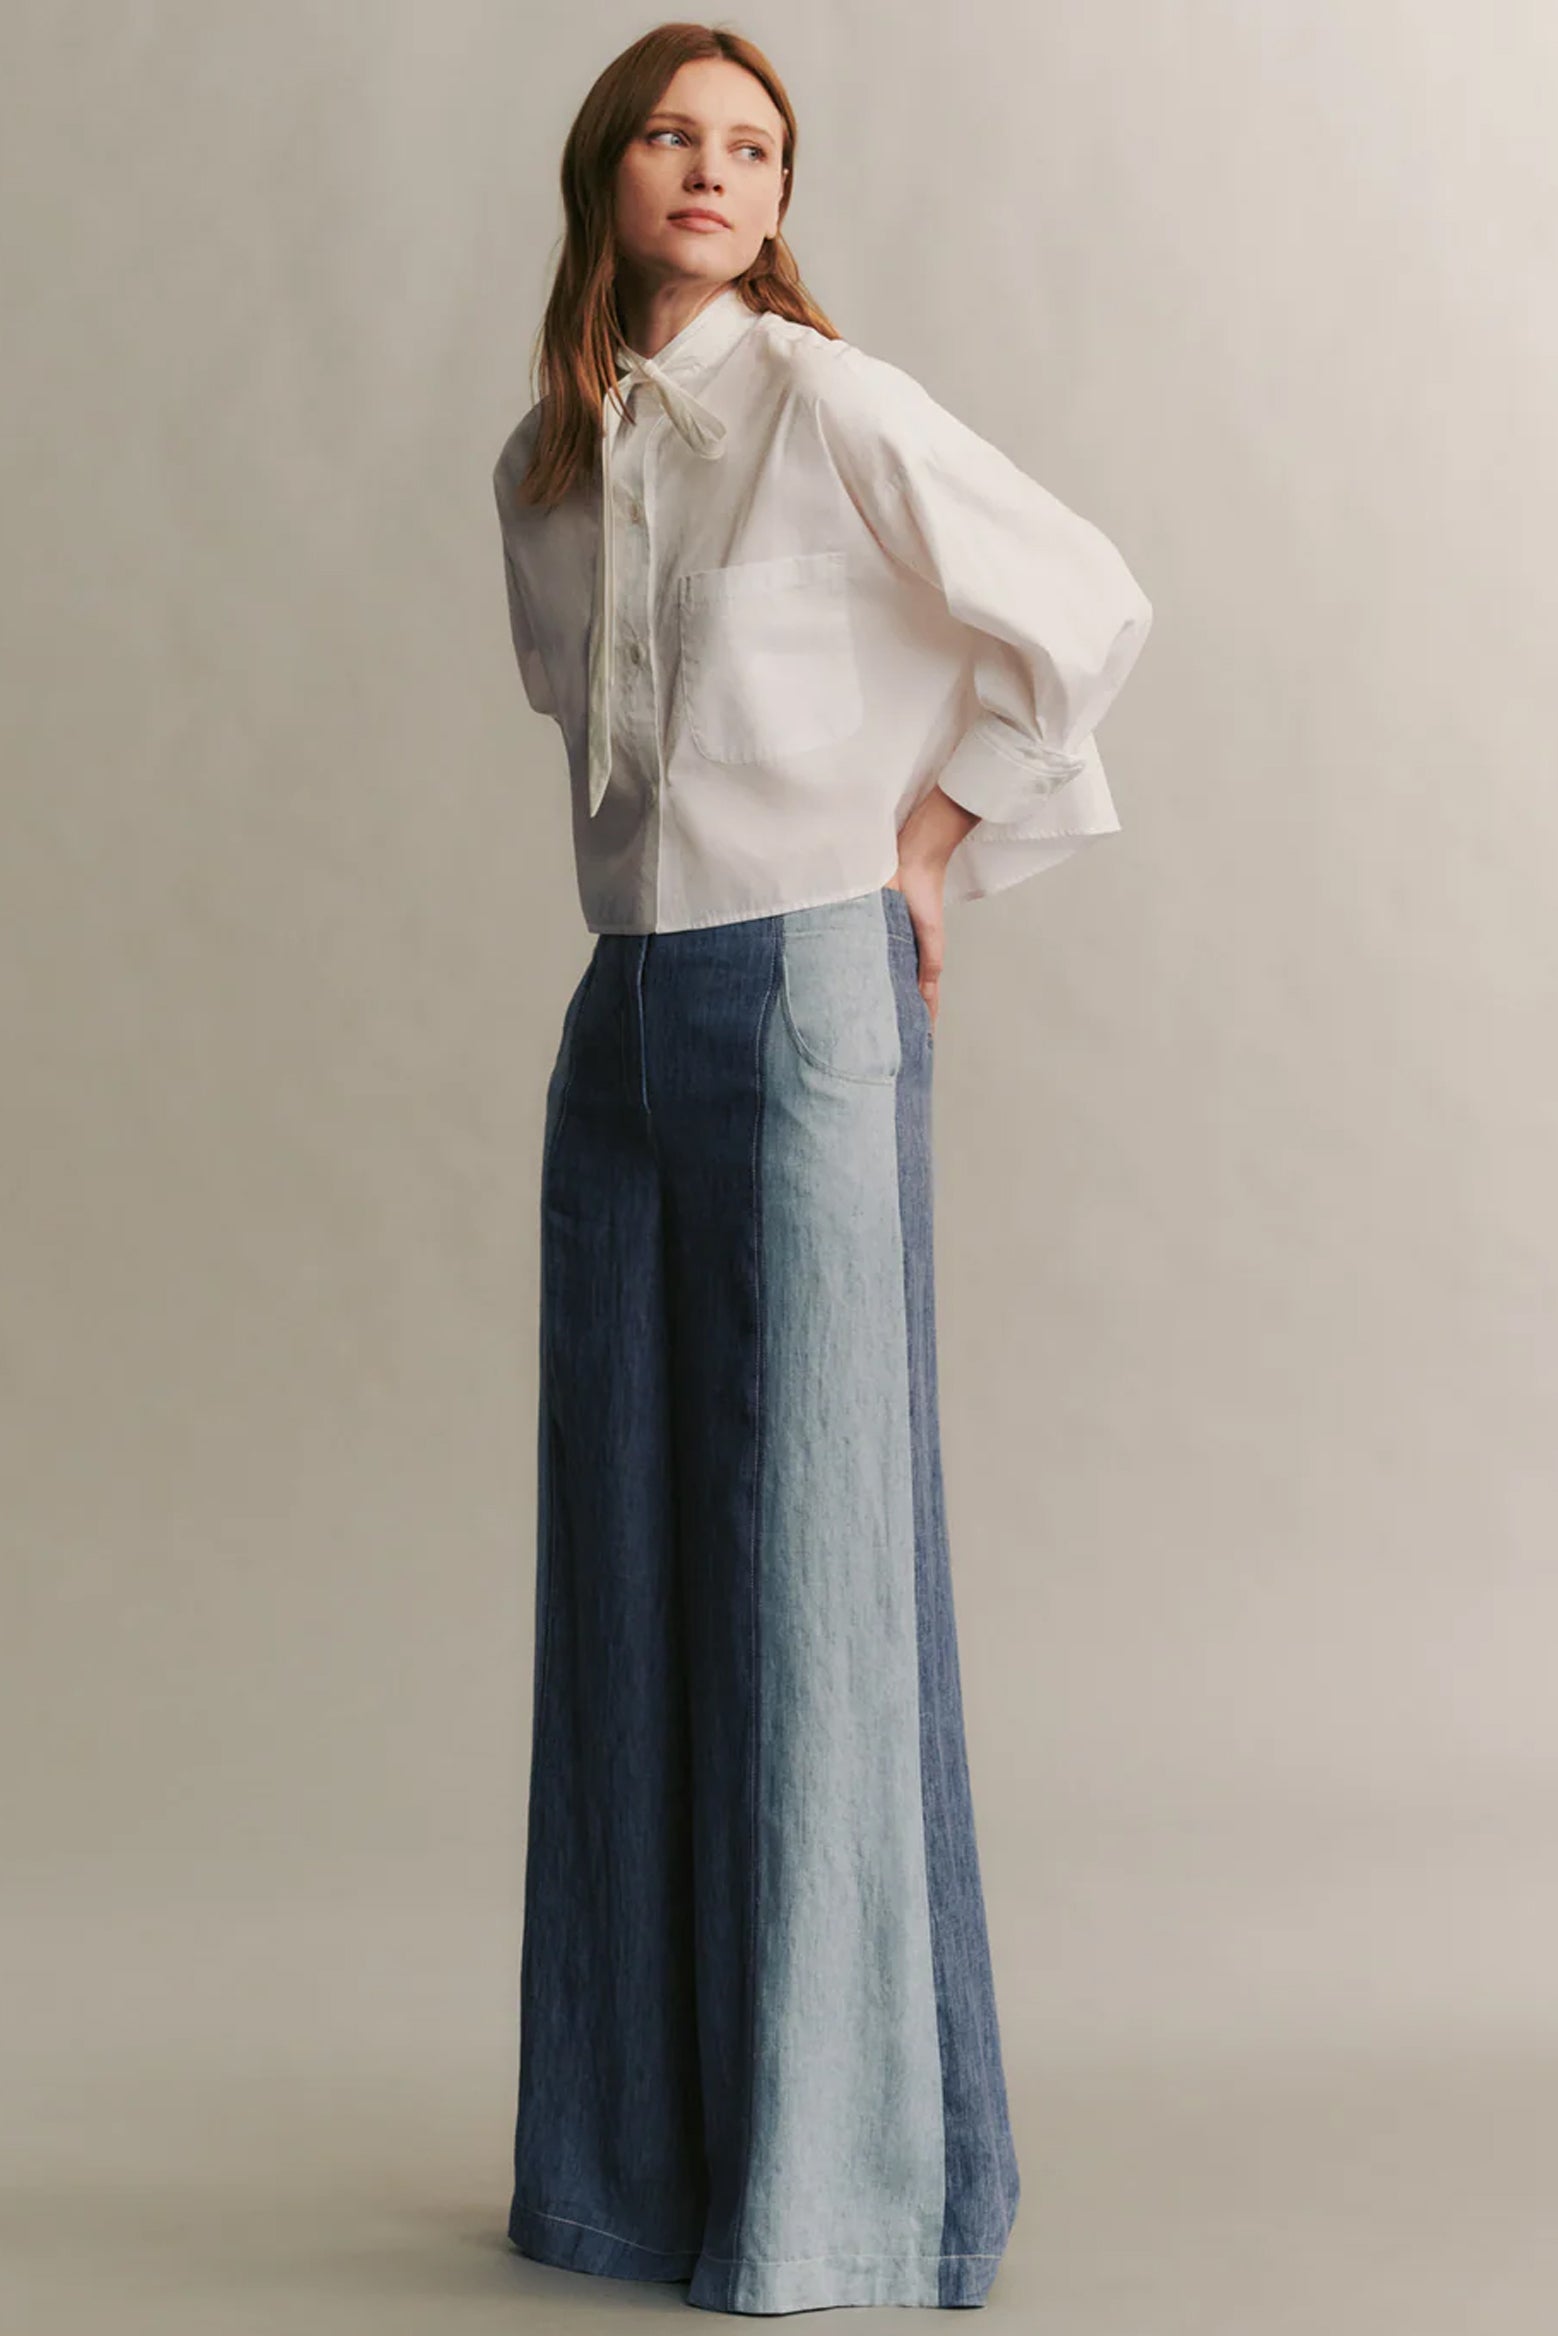 TWP Demie With Combo Pants in Medium Indigo available at The New Trend Australia. 